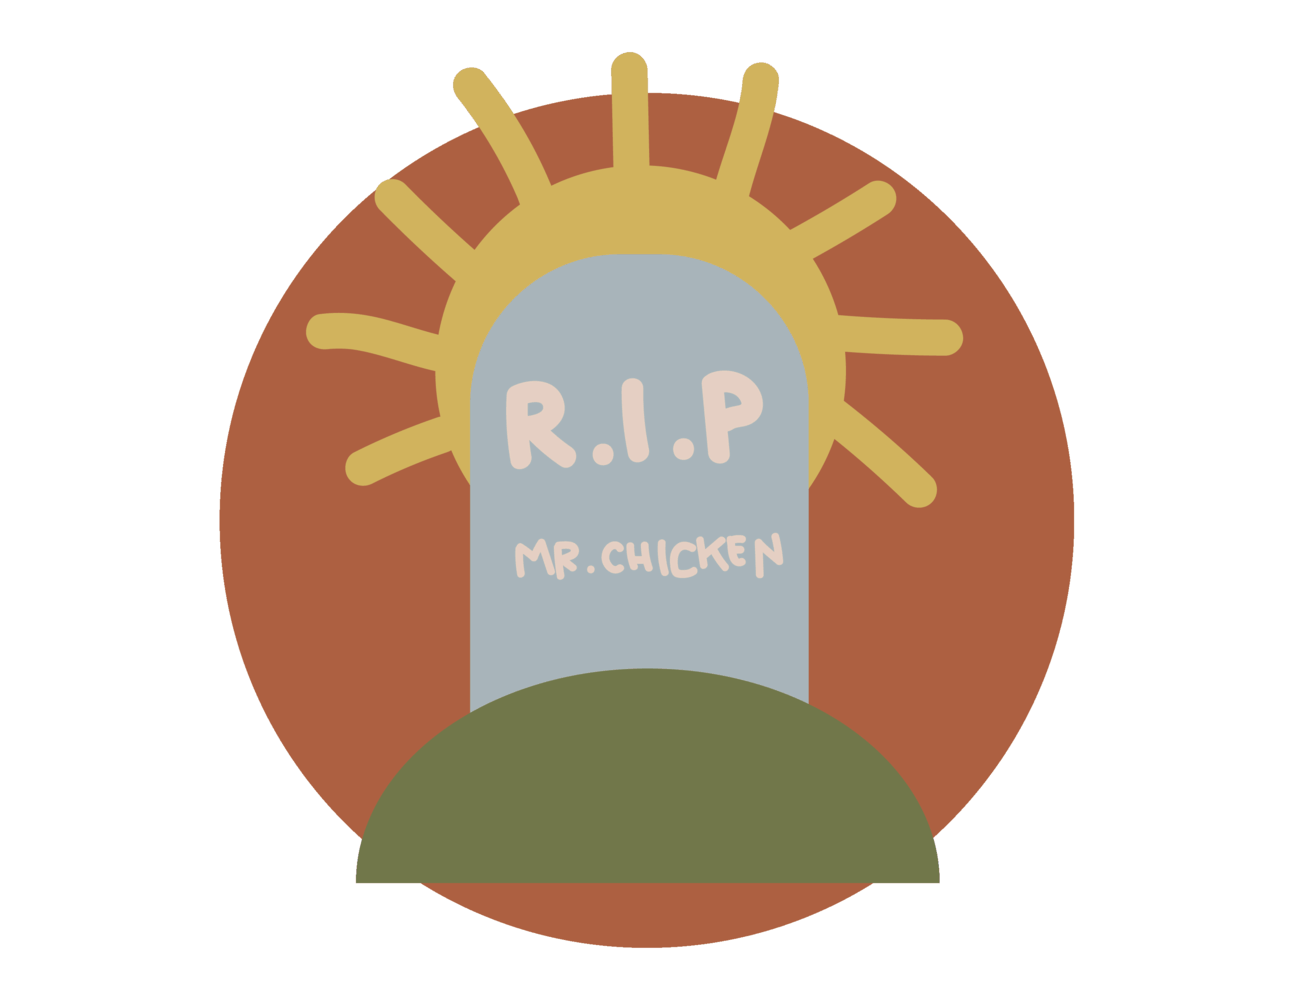 Life lessons from a deceased chicken